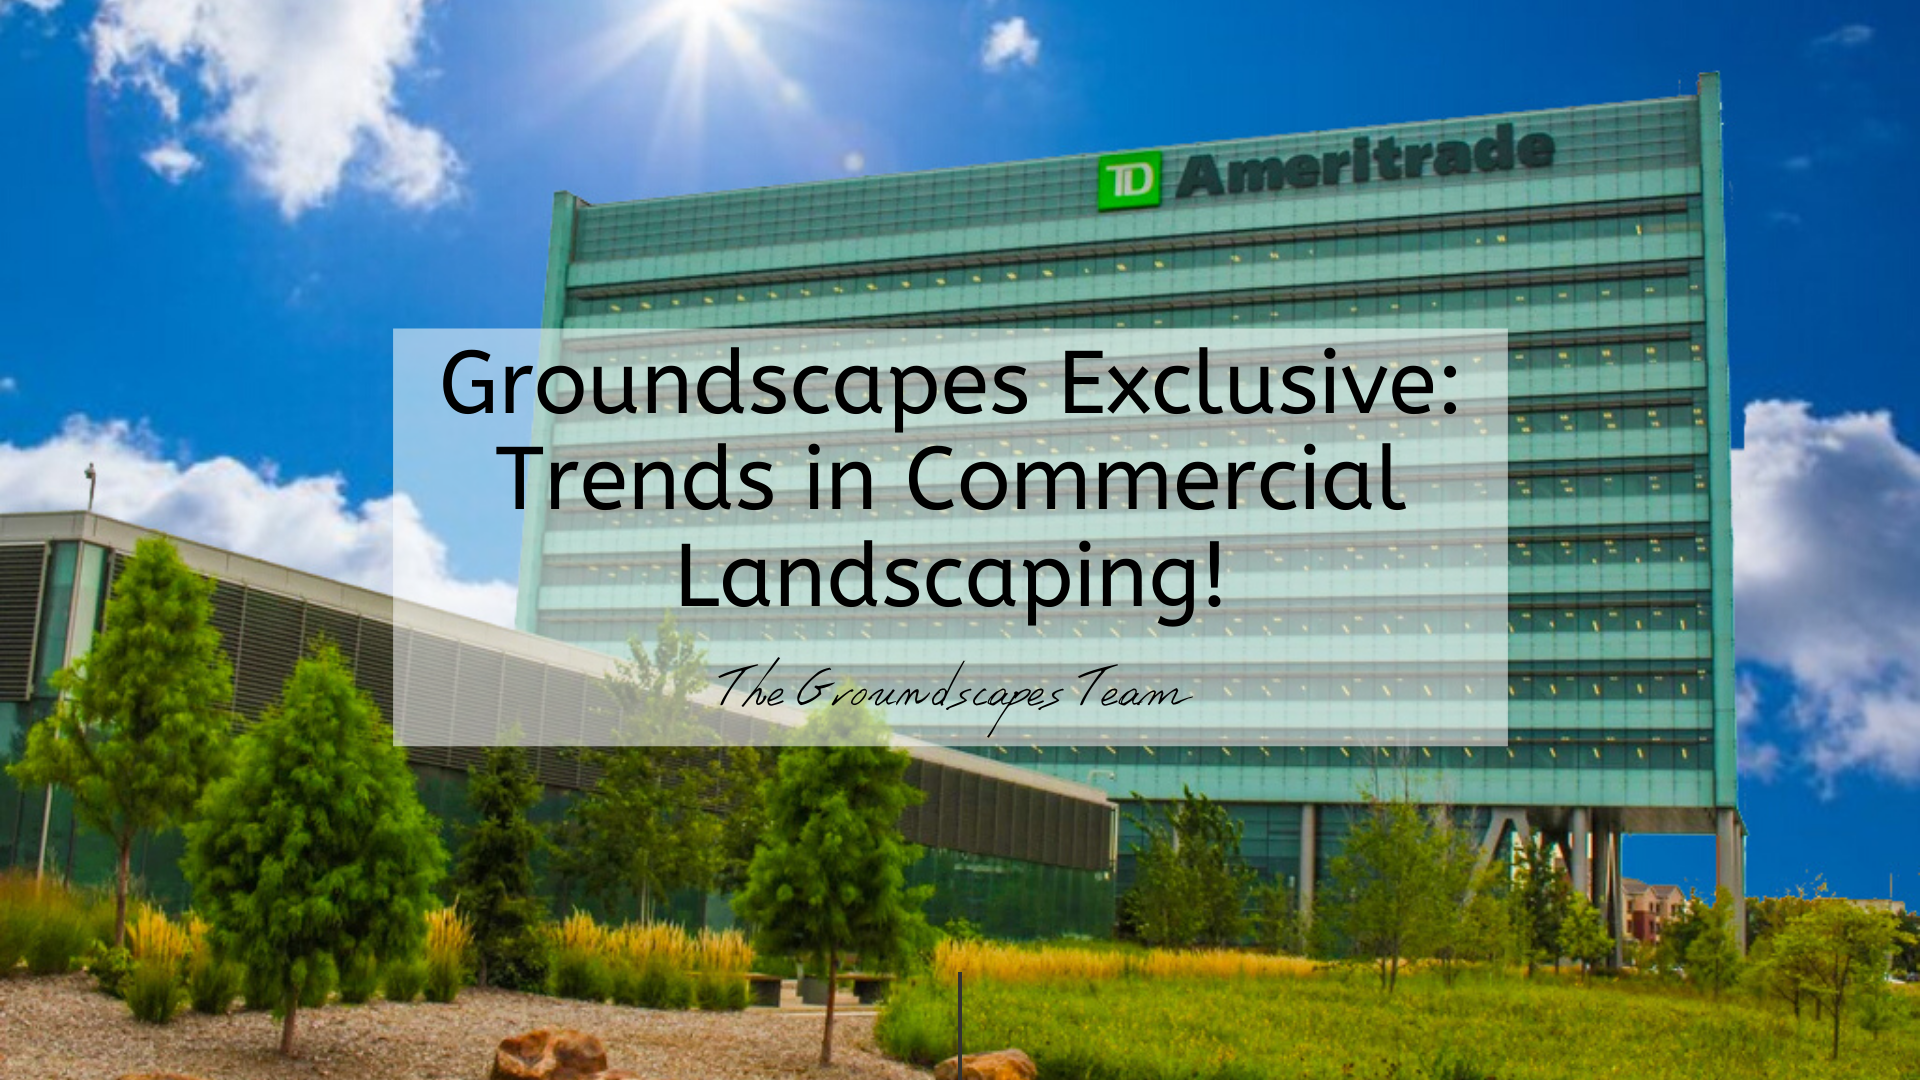 Groundscapes Exclusive: Trends in Commercial Landscaping!